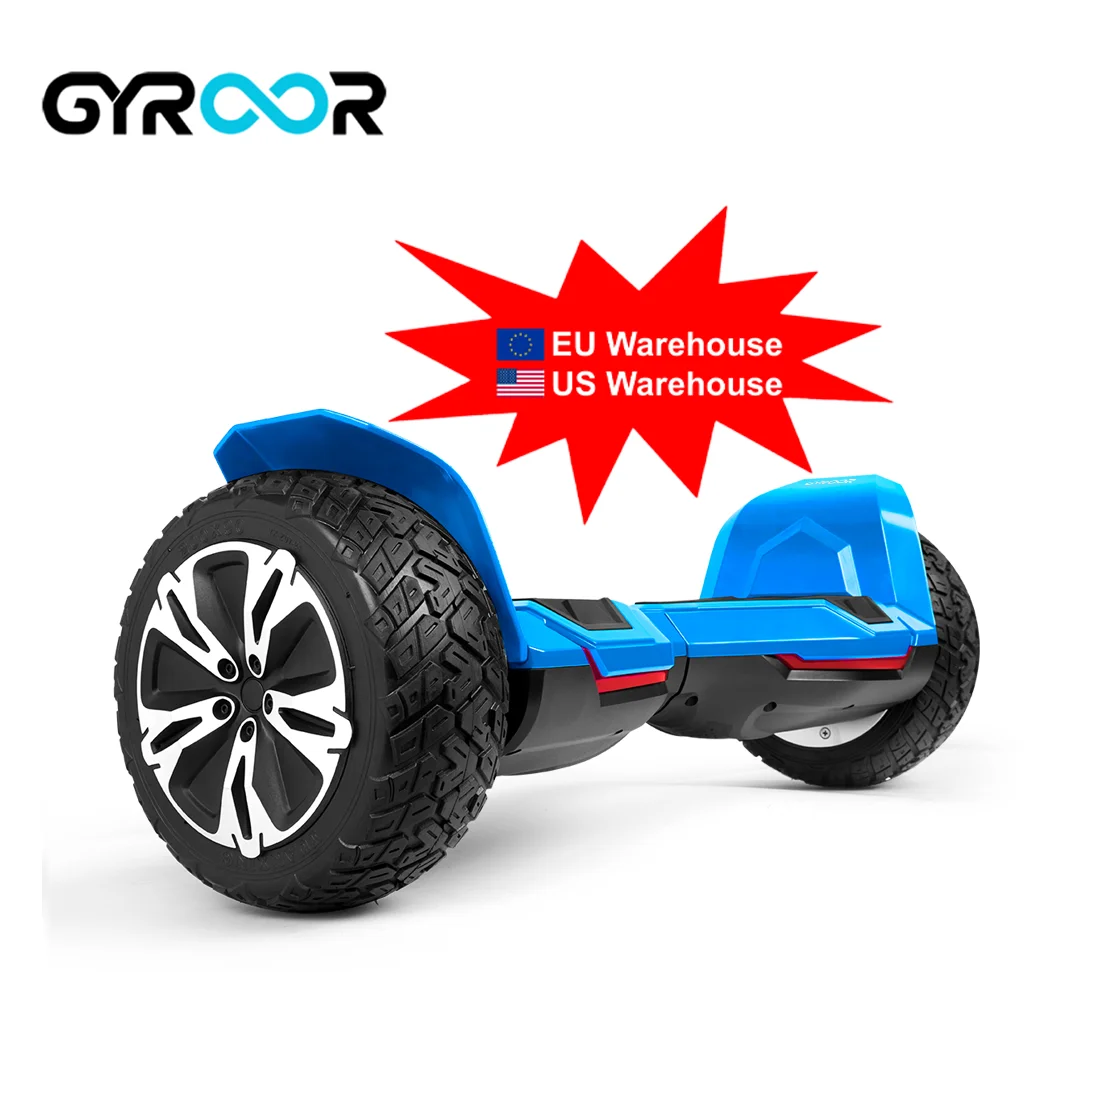 

Gyroor Hot sale high quality hoverboard hoverkart for 2 wheel electric hoverboard balance scooter, Black/red/blue